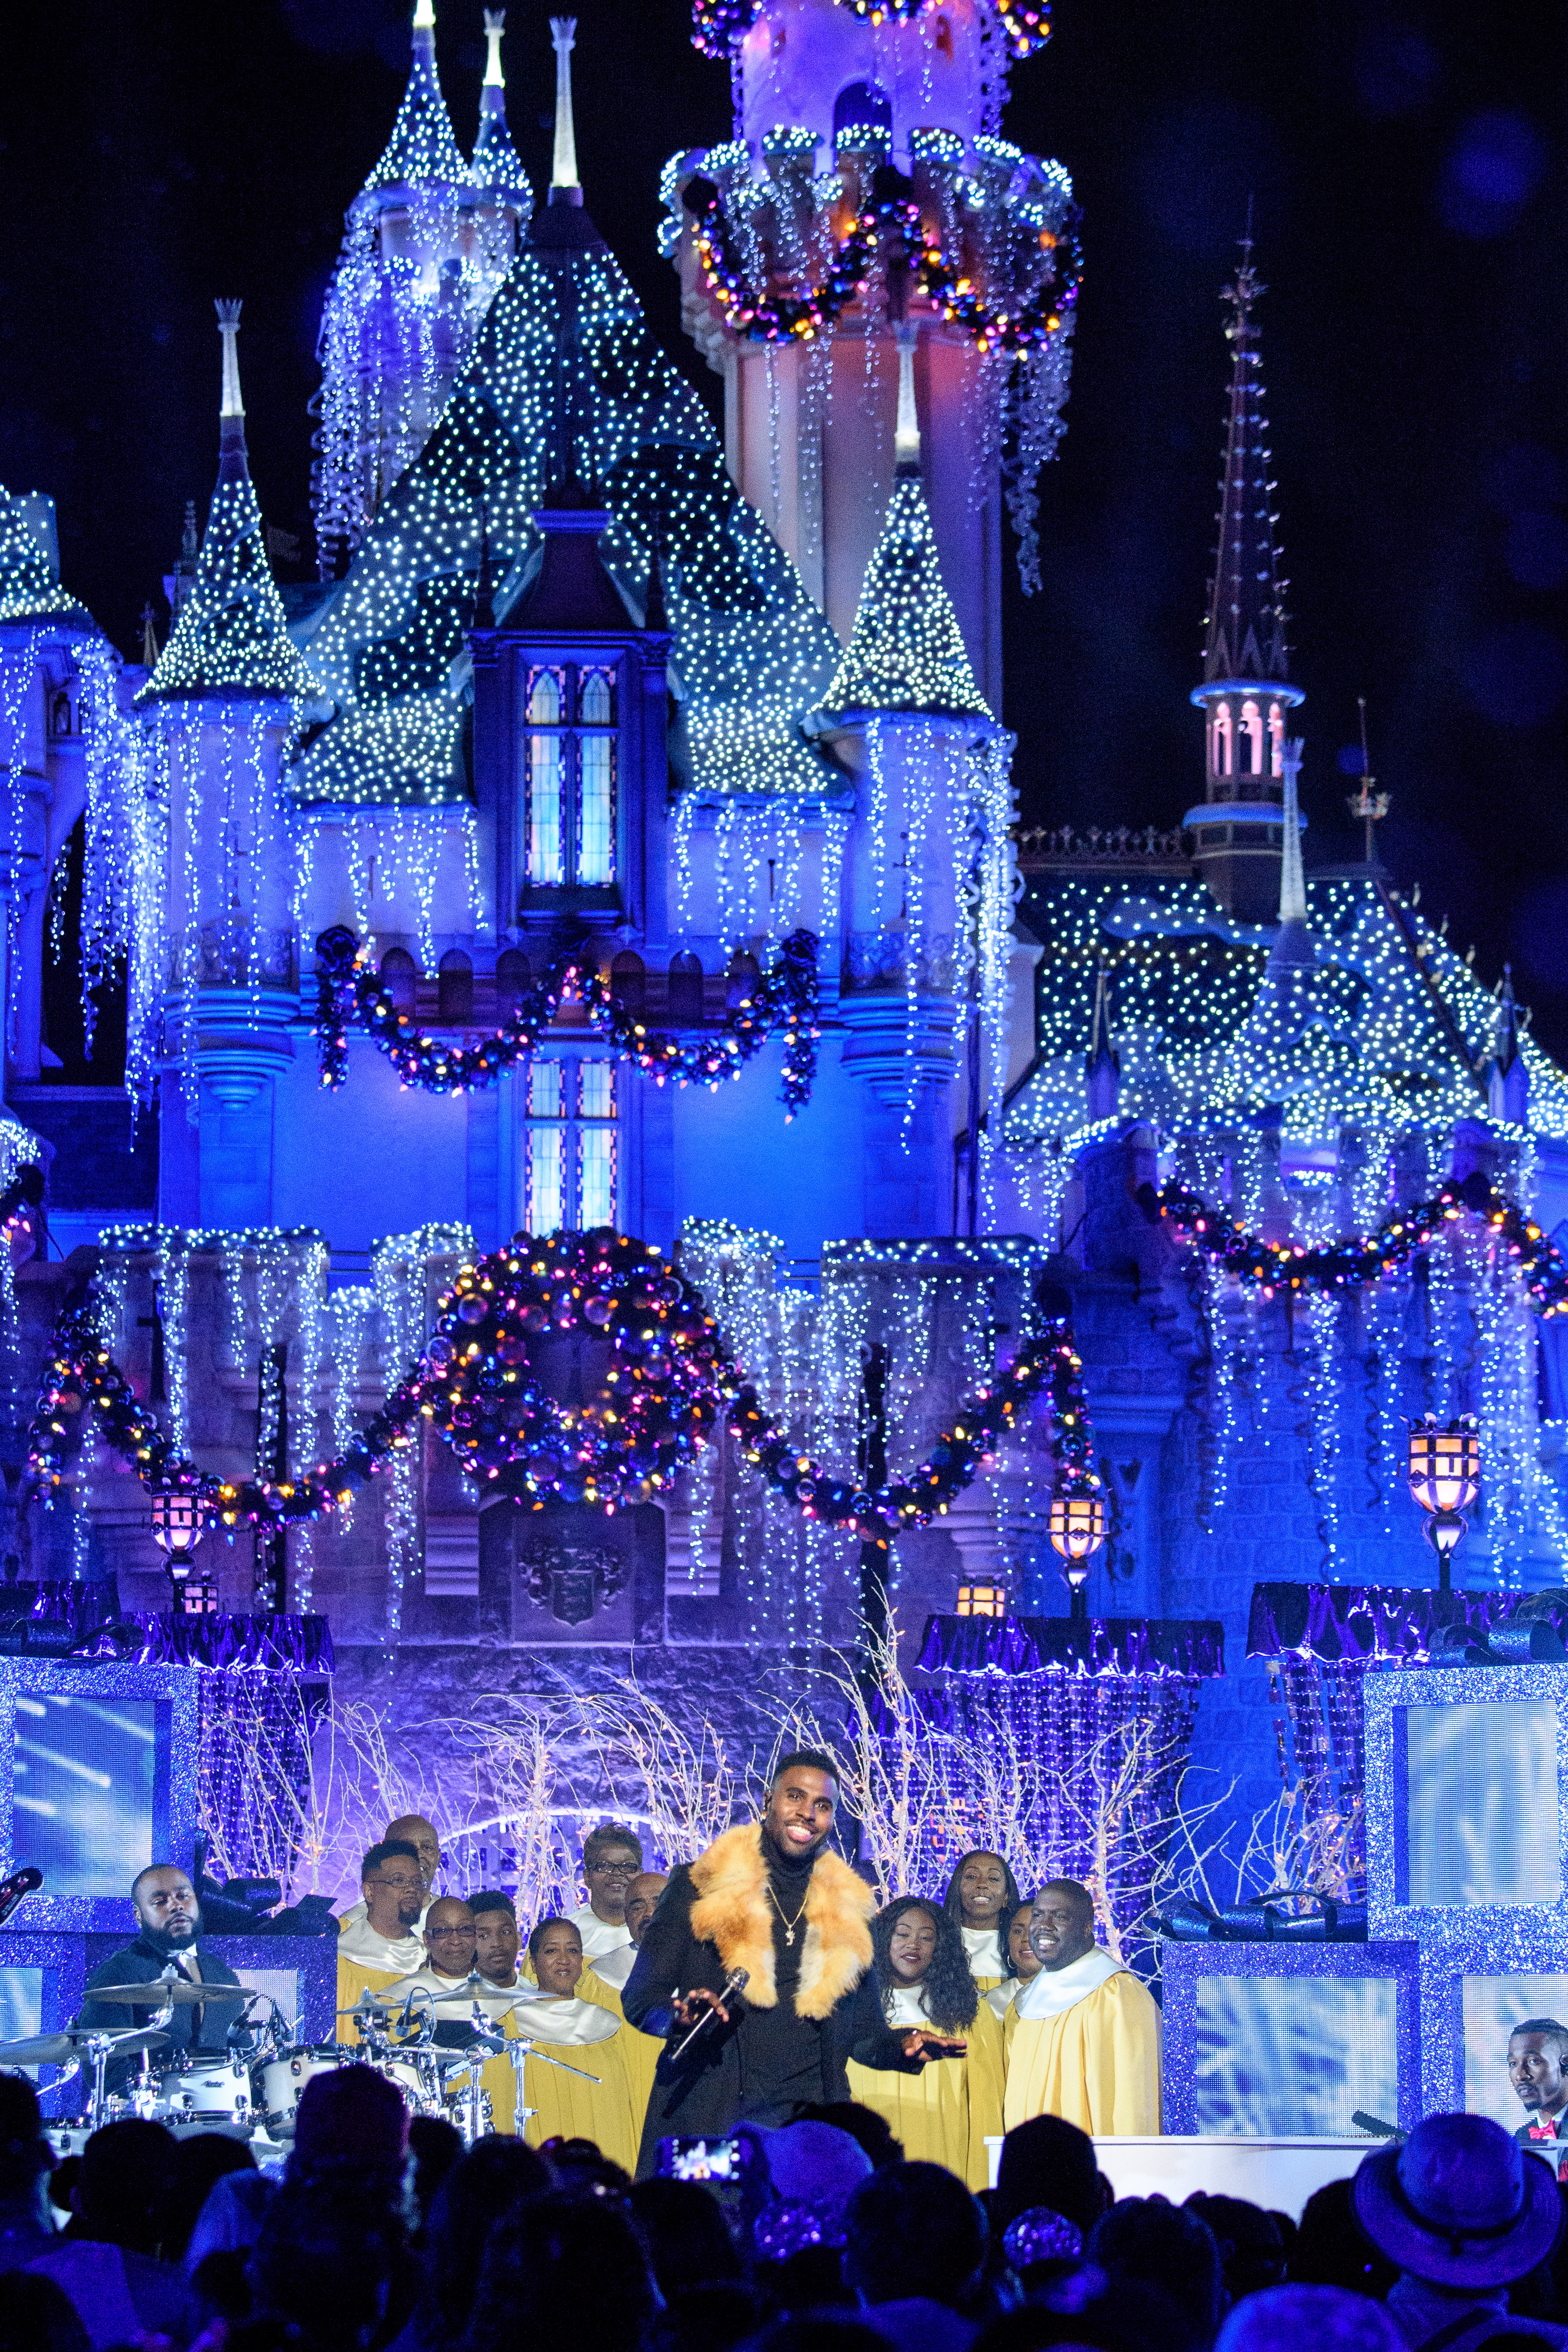 Singer, songwriter and dancer Jason Derulo performs on the Sleeping Beauty Castle stage at Disneyland Park in Anaheim, Calif., Monday, Nov. 13, 2017, during a taping of "The Wonderful World of Disney: Magical Holiday Celebration." The TV special premieres Thursday, November 30, 9-11p.m. ET, on The ABC Television Network. (Richard Harbaugh, photographer)